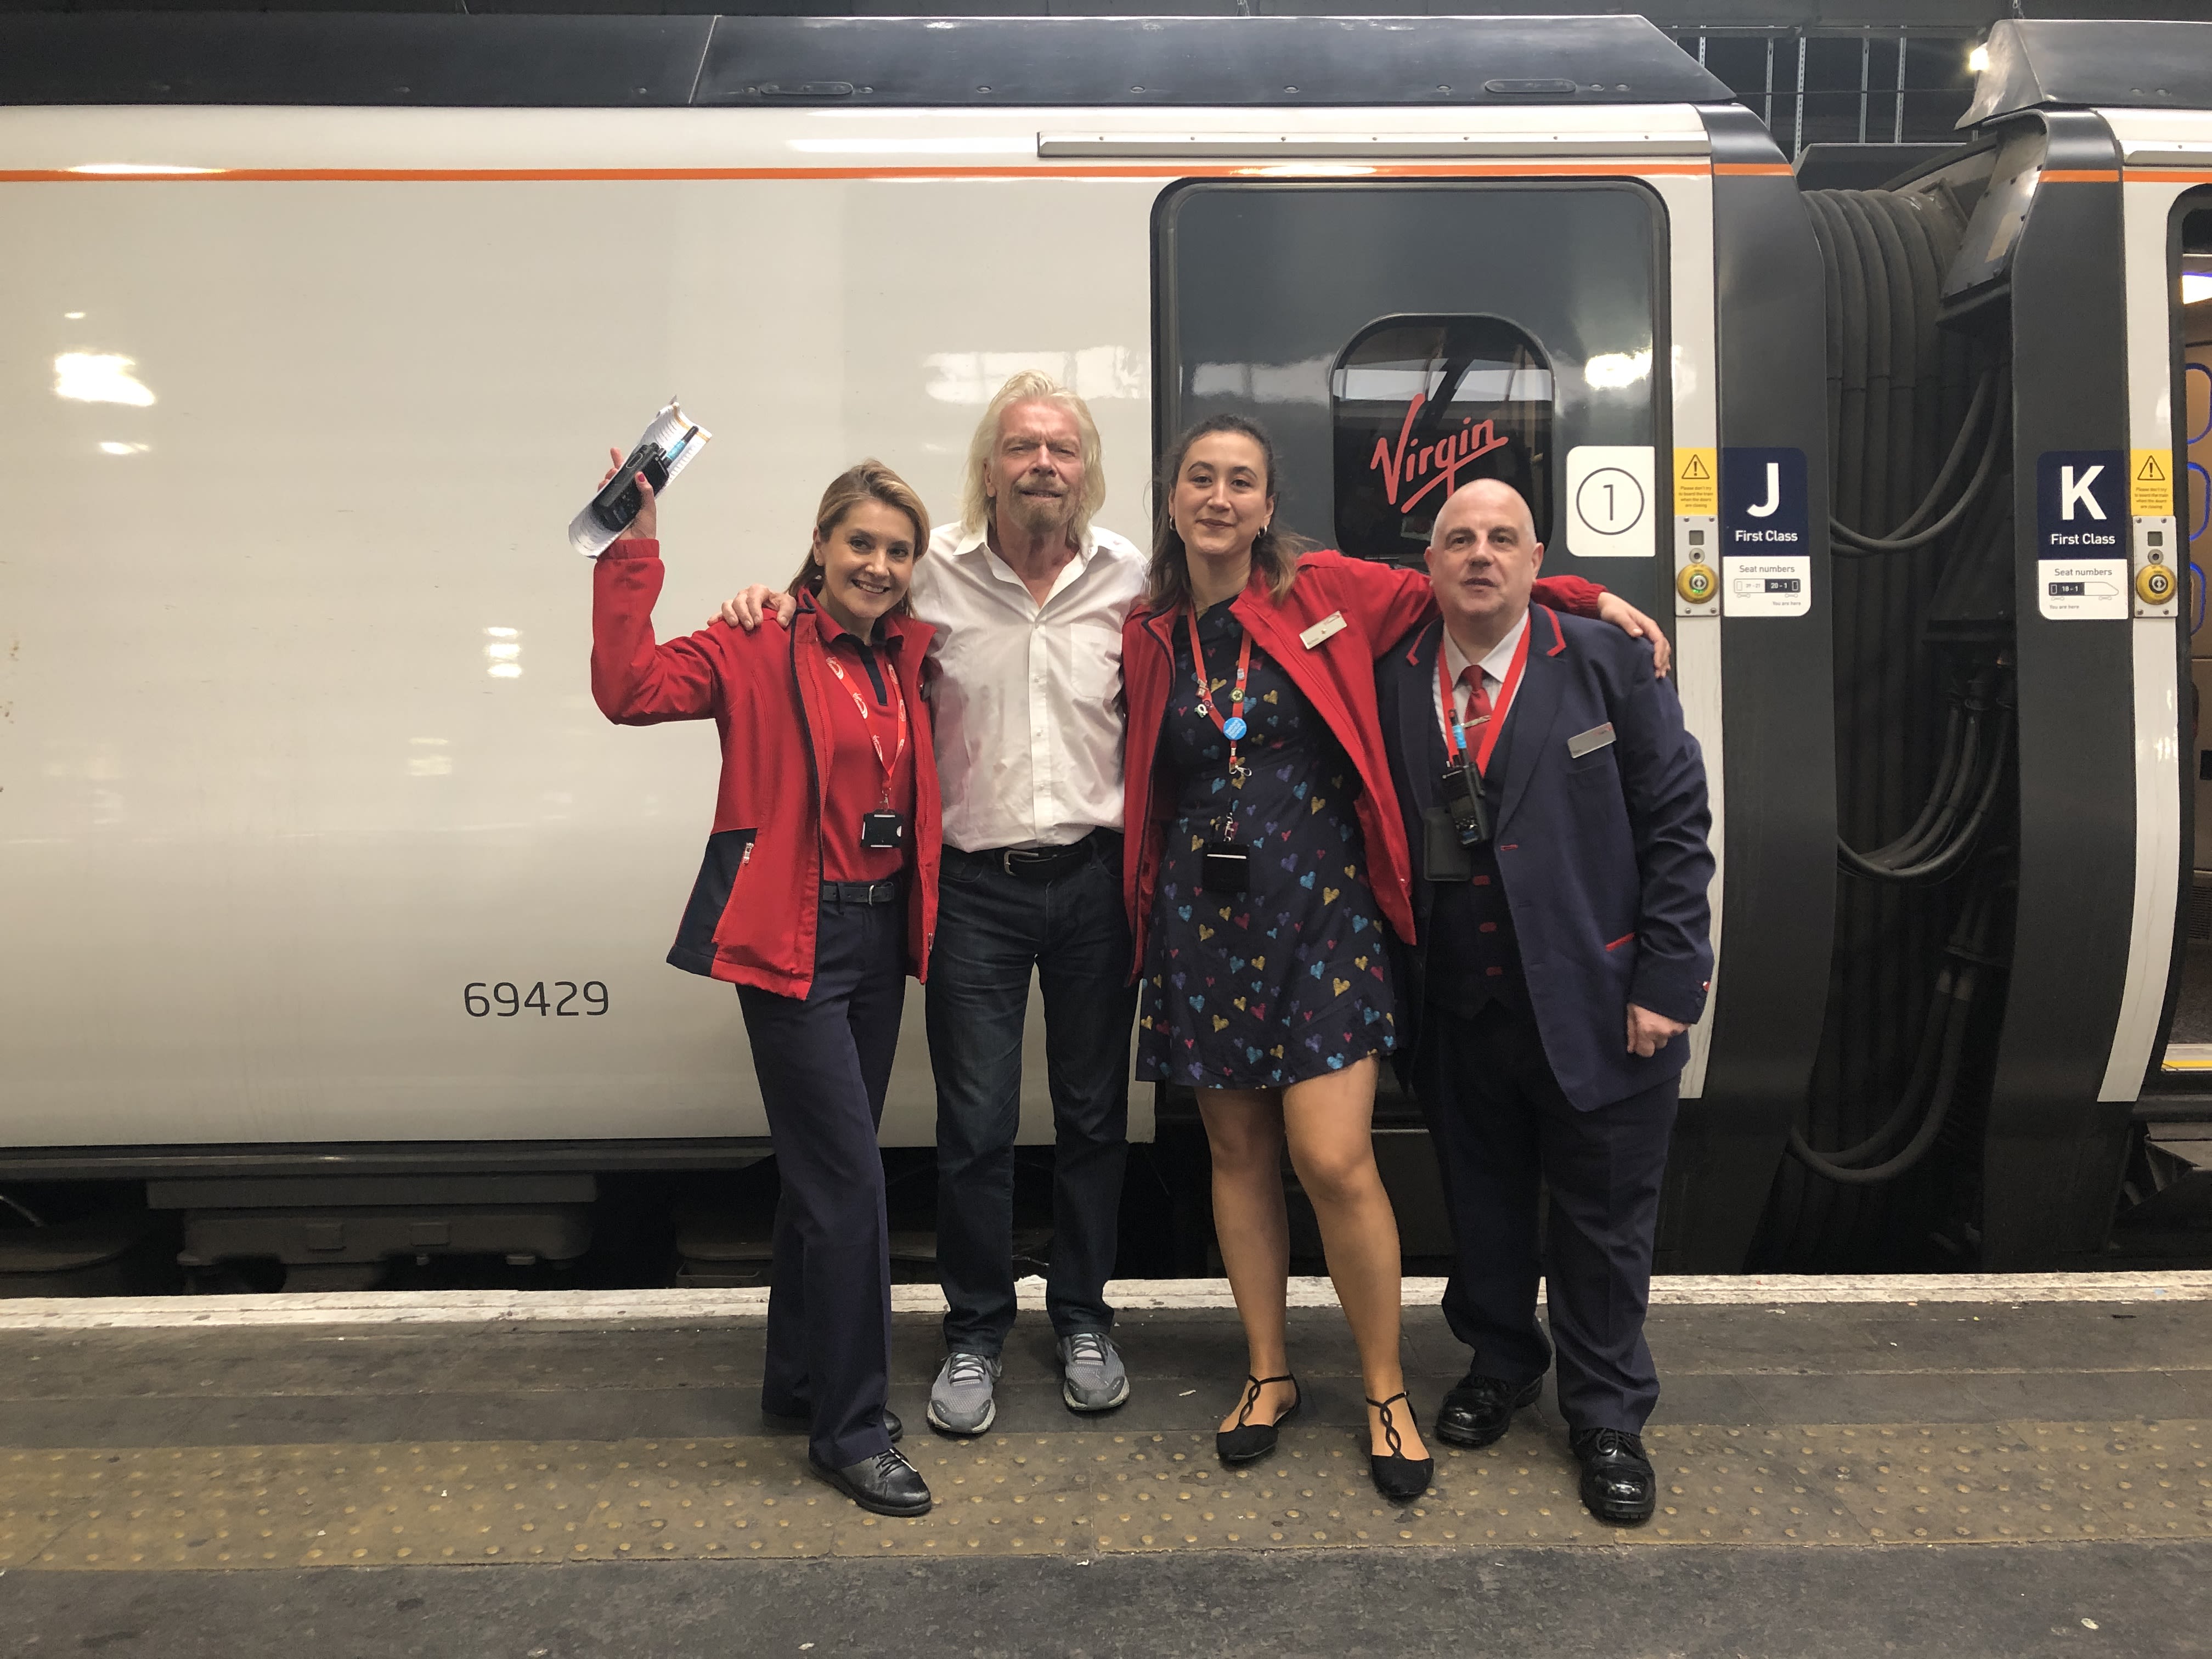 Richard Branson with Virgin Trains staff in front of a Virgin Train